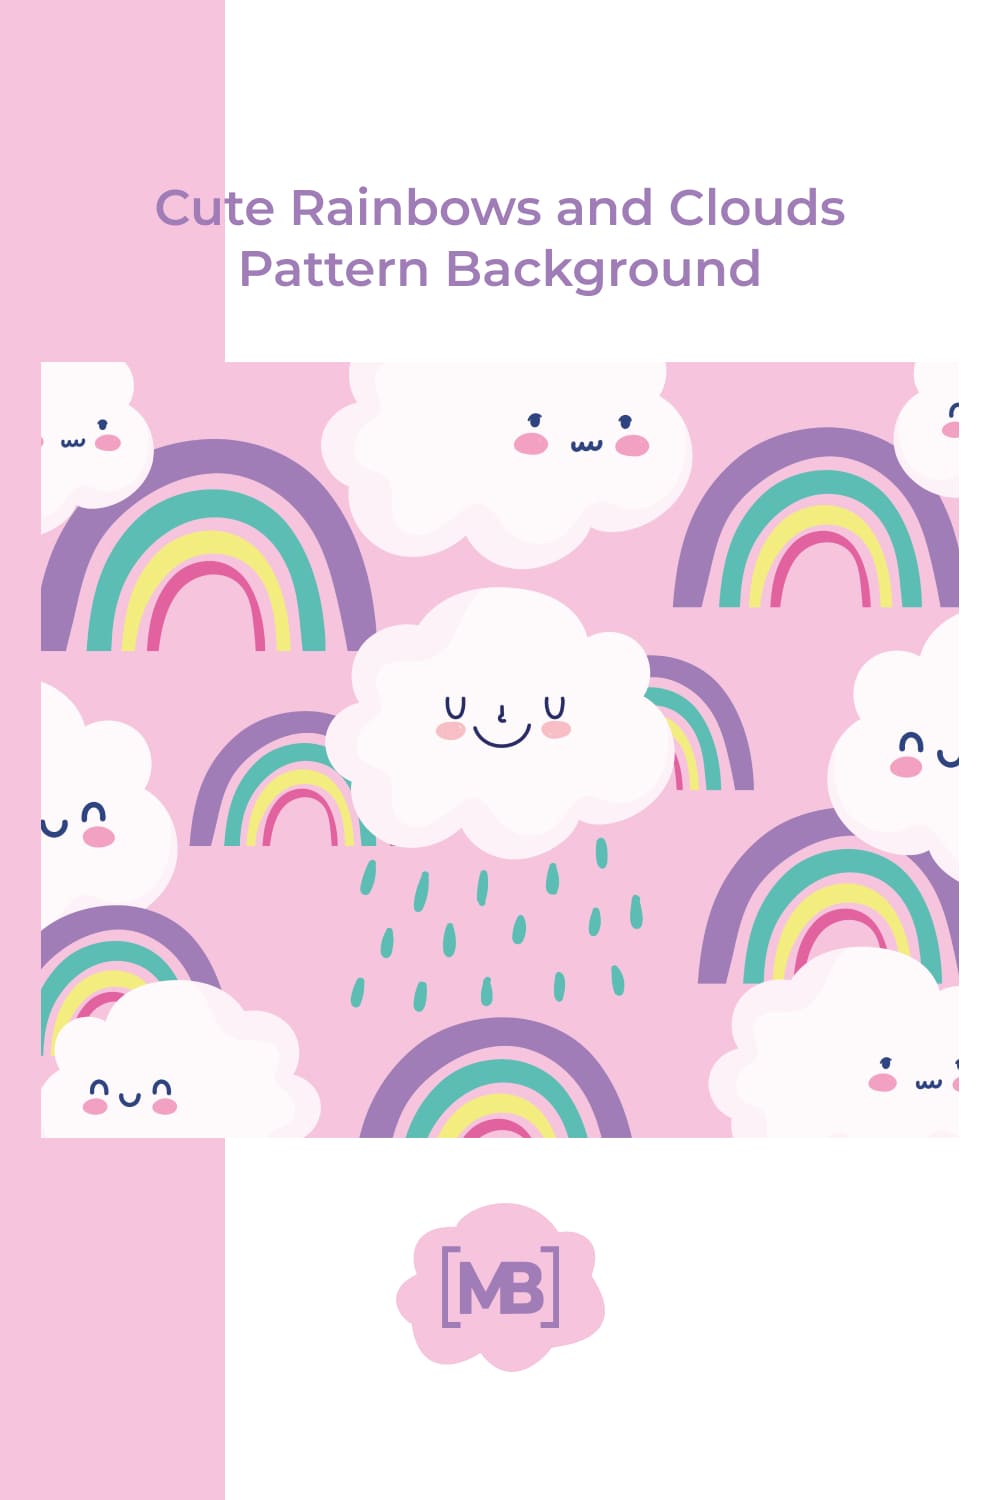 Cute rainbows and clouds pattern background.